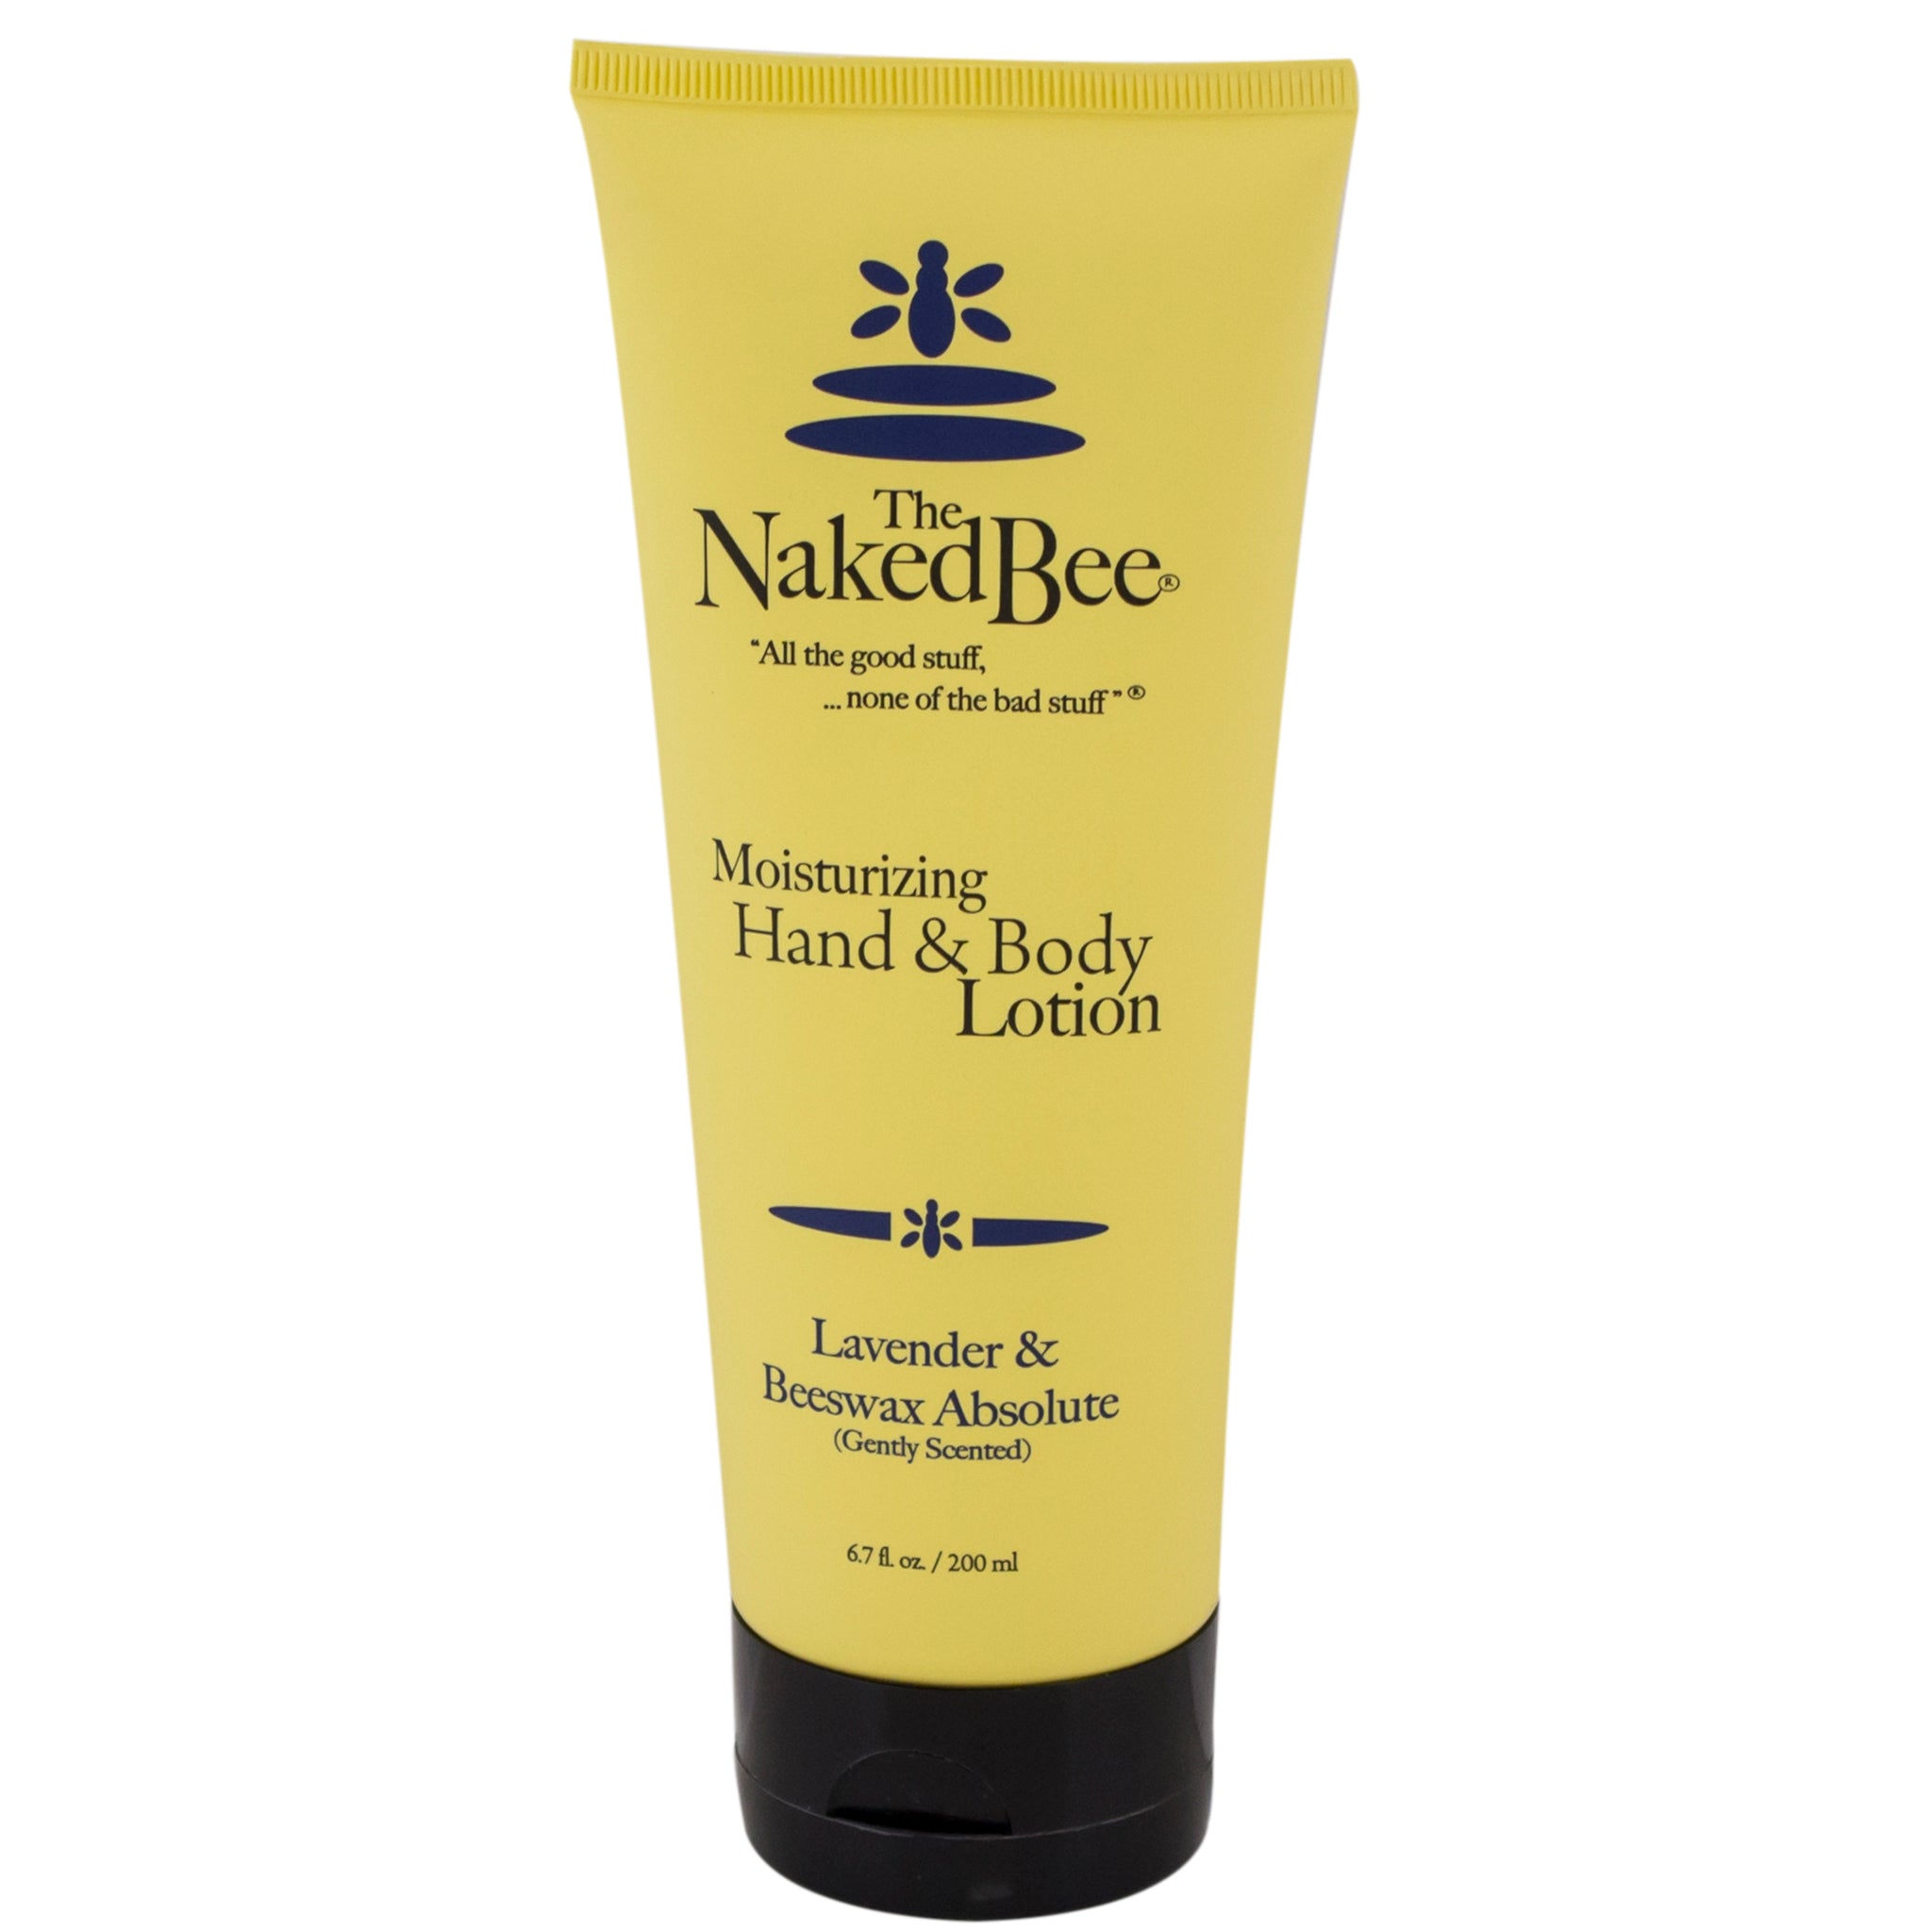 Hand & Body Lotion Collection - The Naked Bee